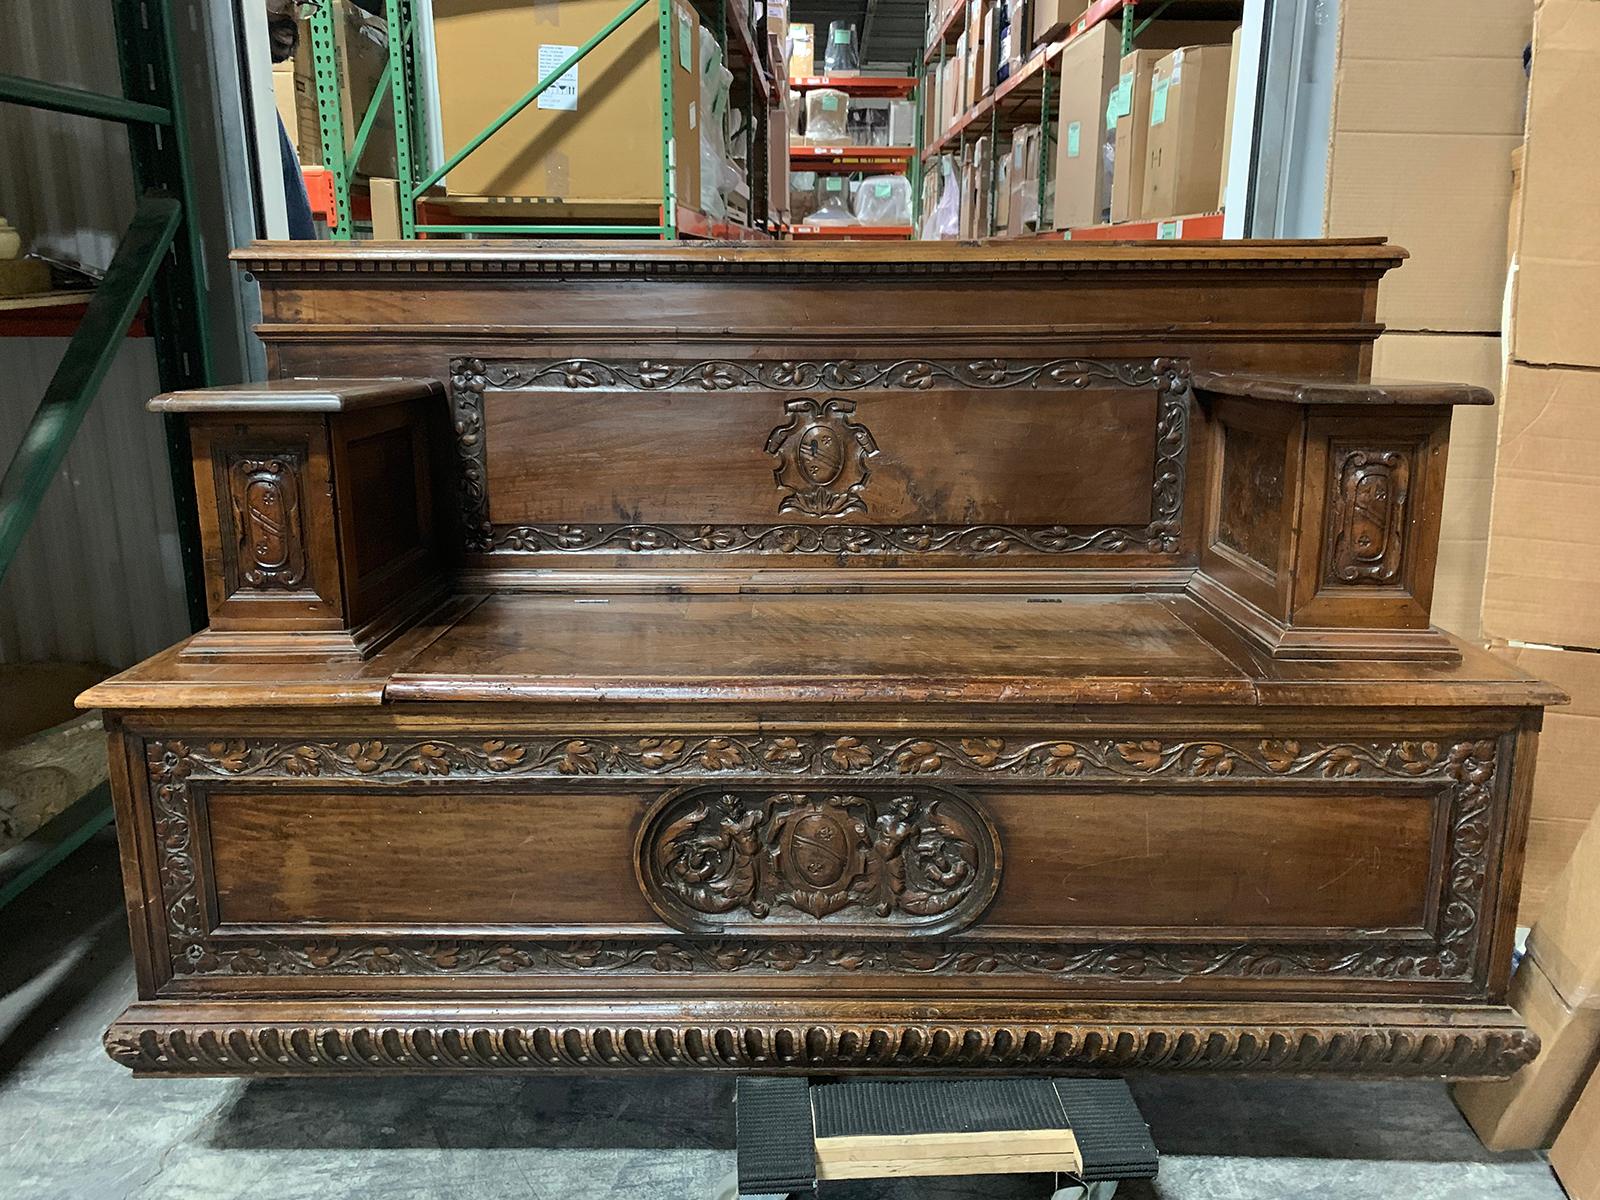 18th-19th century Italian Cassapanca bench, labeled 'Made in Italy'
Beautiful carving
Great wood/patina
Seat and arms lift revealing storage.